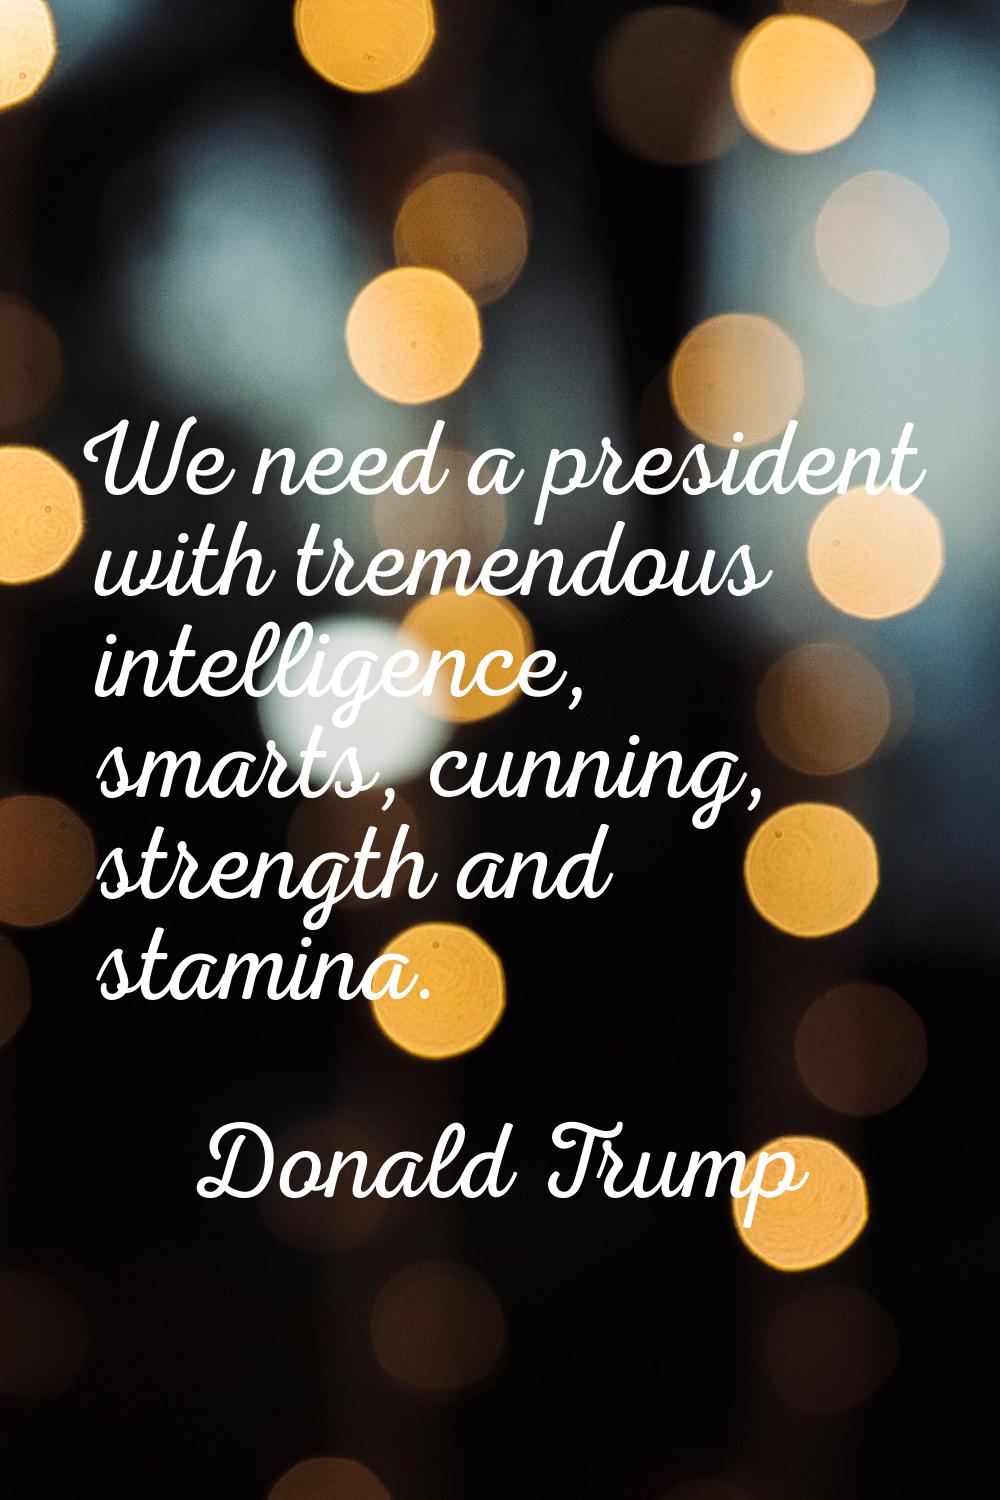 We need a president with tremendous intelligence, smarts, cunning, strength and stamina.